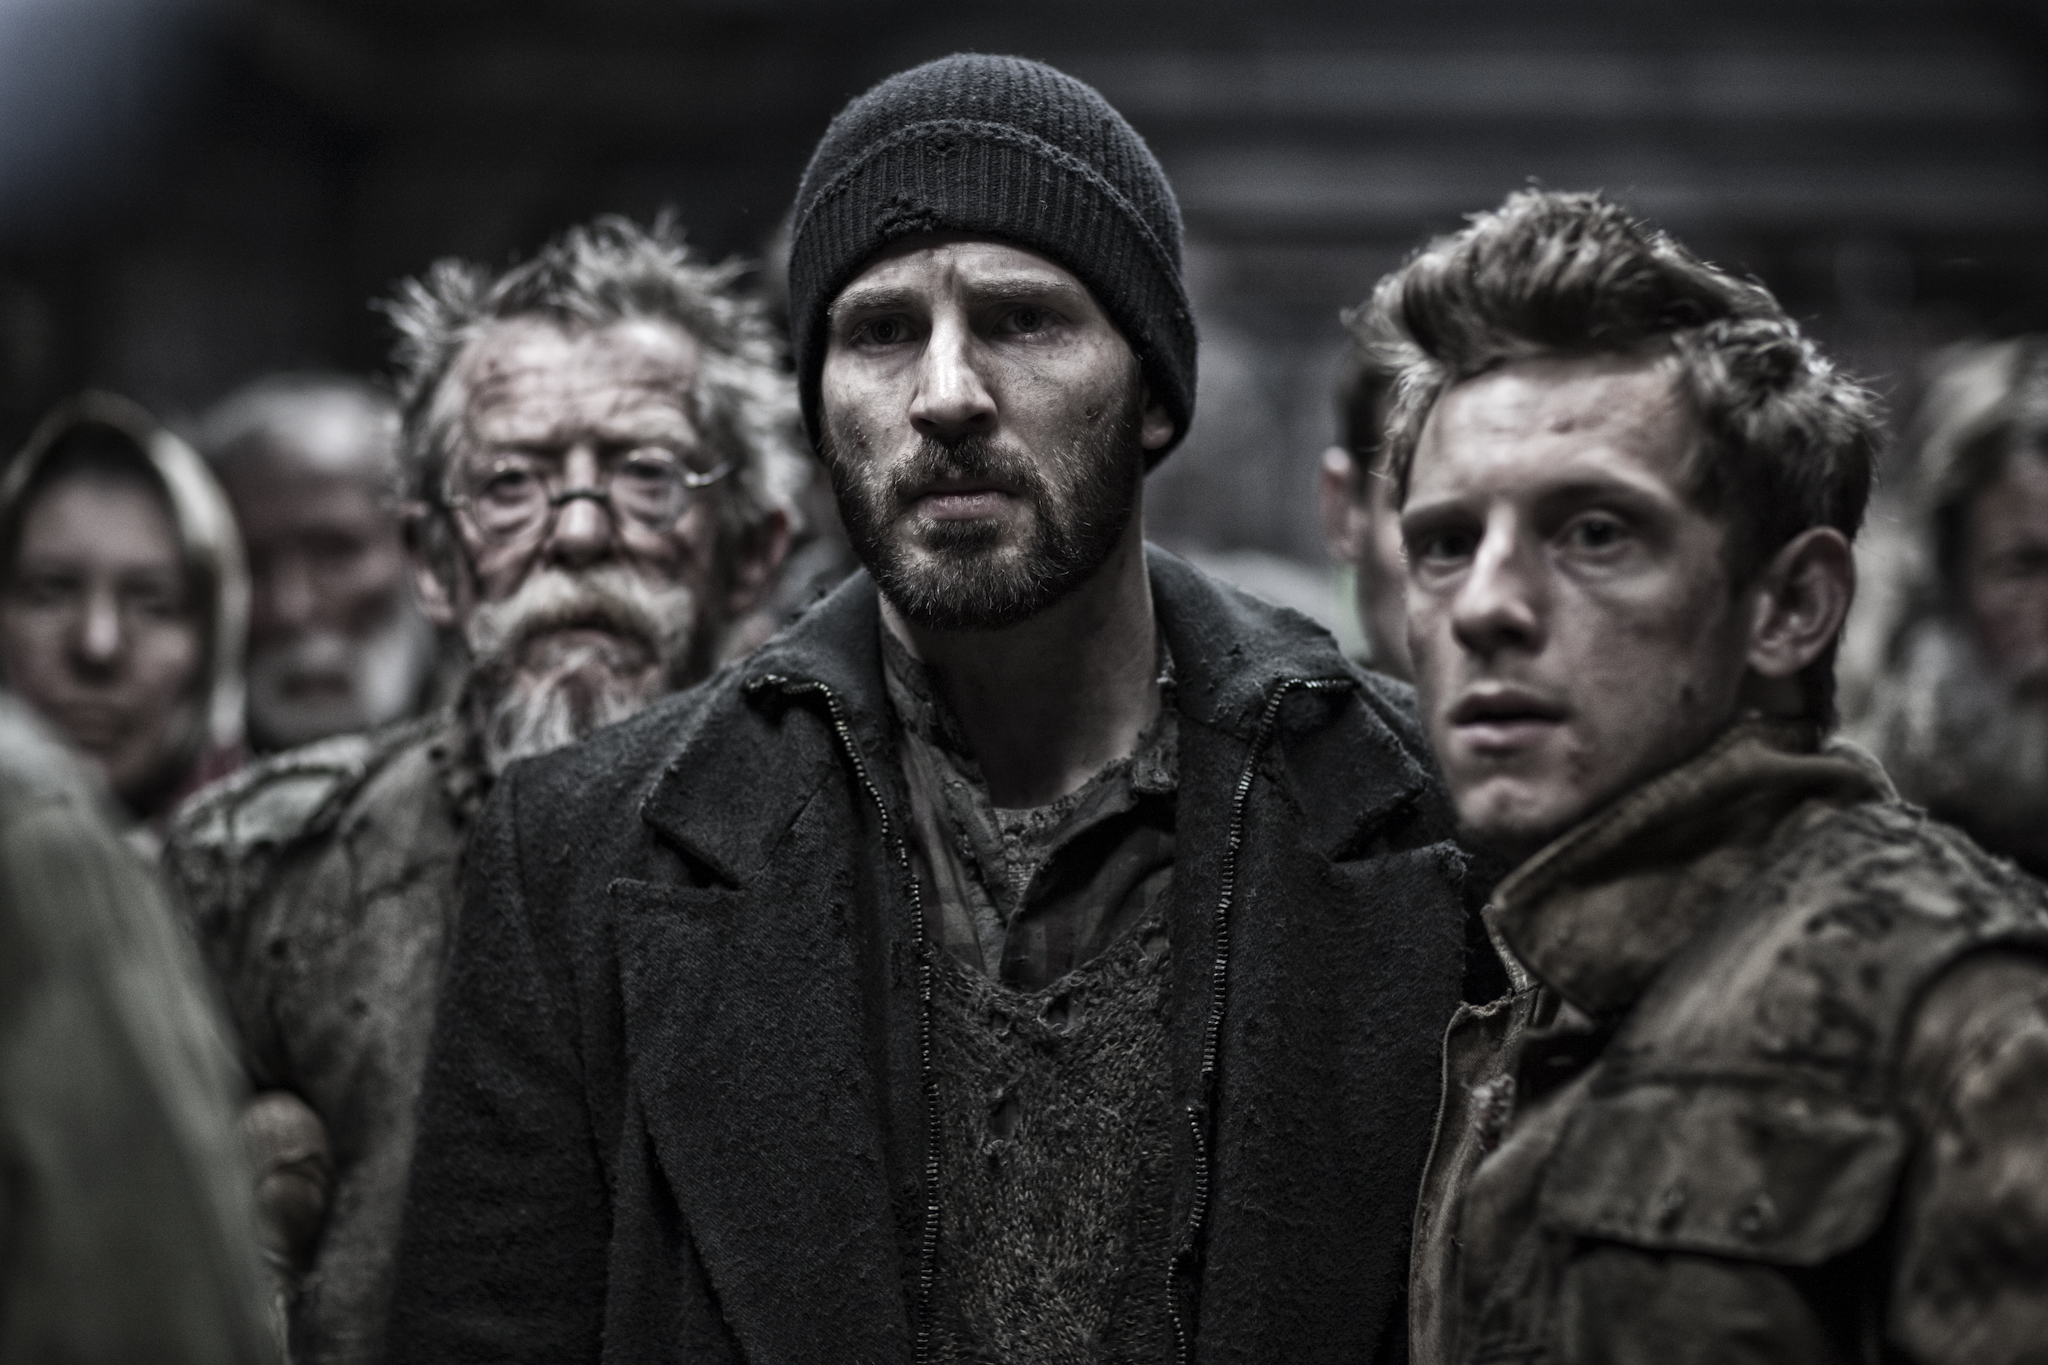 Still of John Hurt, Jamie Bell and Chris Evans in Sniego traukinys (2013)